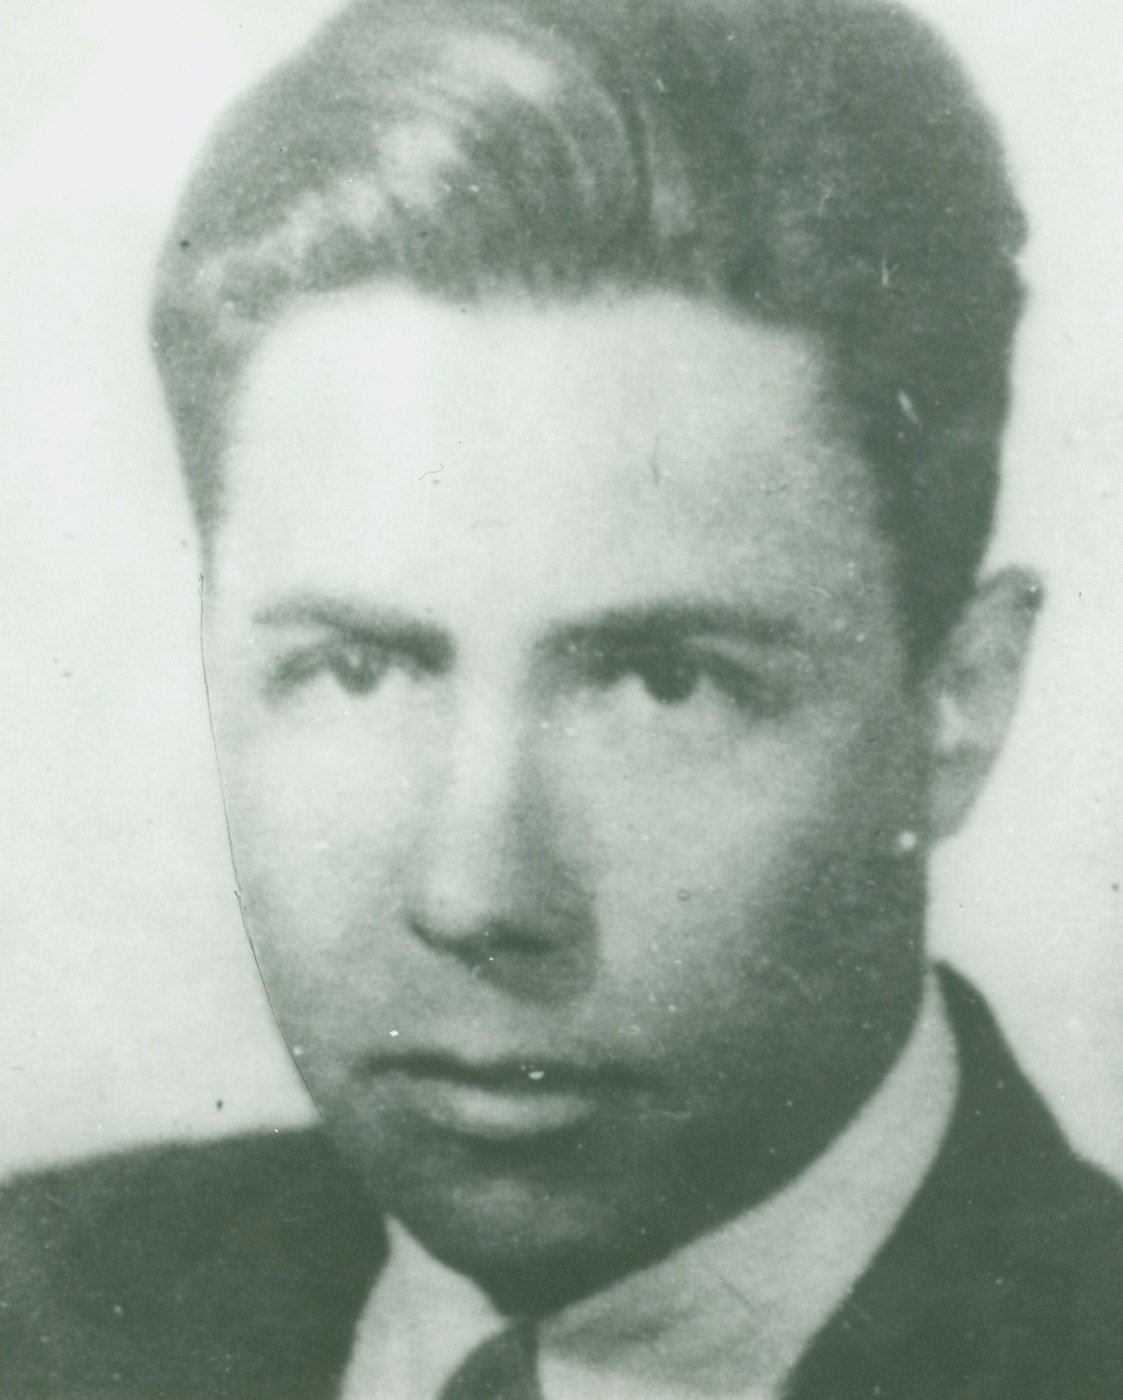 Anatoli Yakovlev was the general consul of the Soviet mission in New York City and a senior intelligence agent/Soviet handler of the A-Bomb spies, including Fuchs, Sobell, and the Rosenbergs.